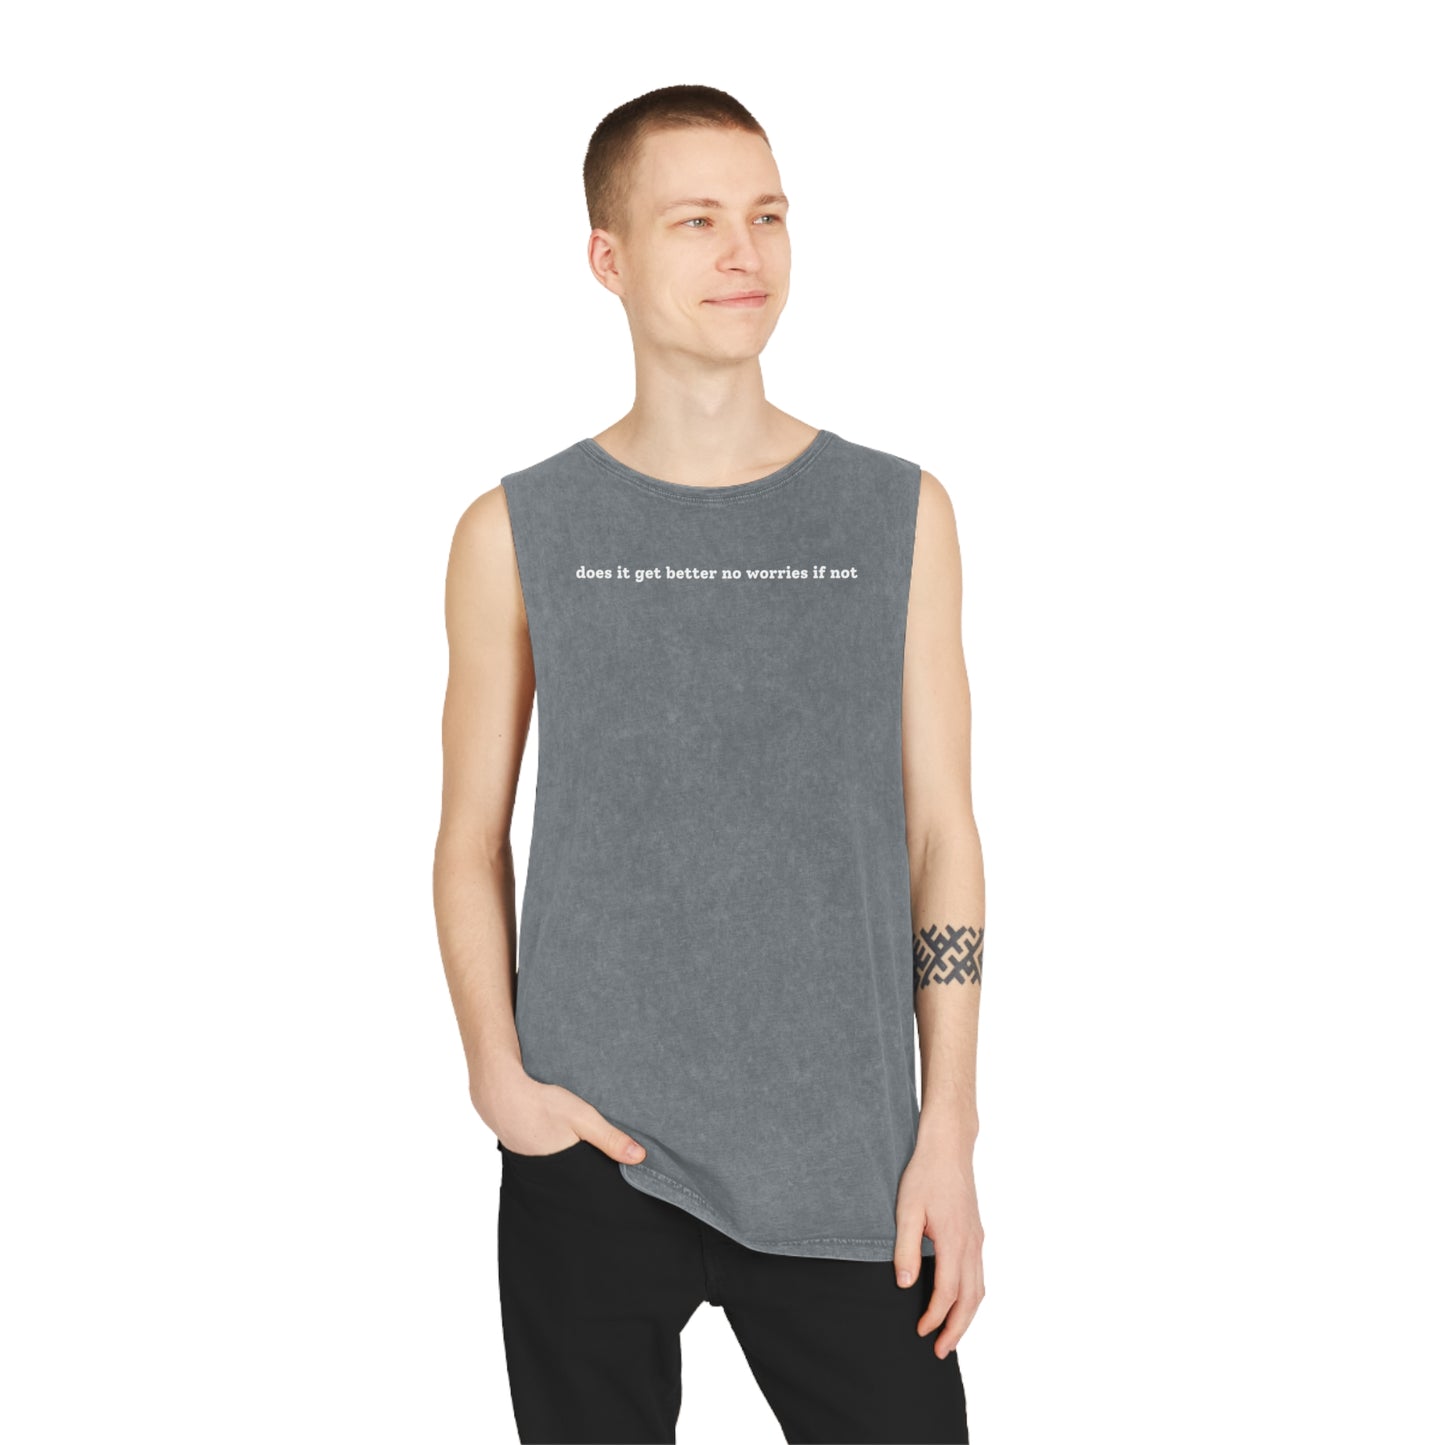 Does It Get Better No Worries If Not - Stonewash Tank Top